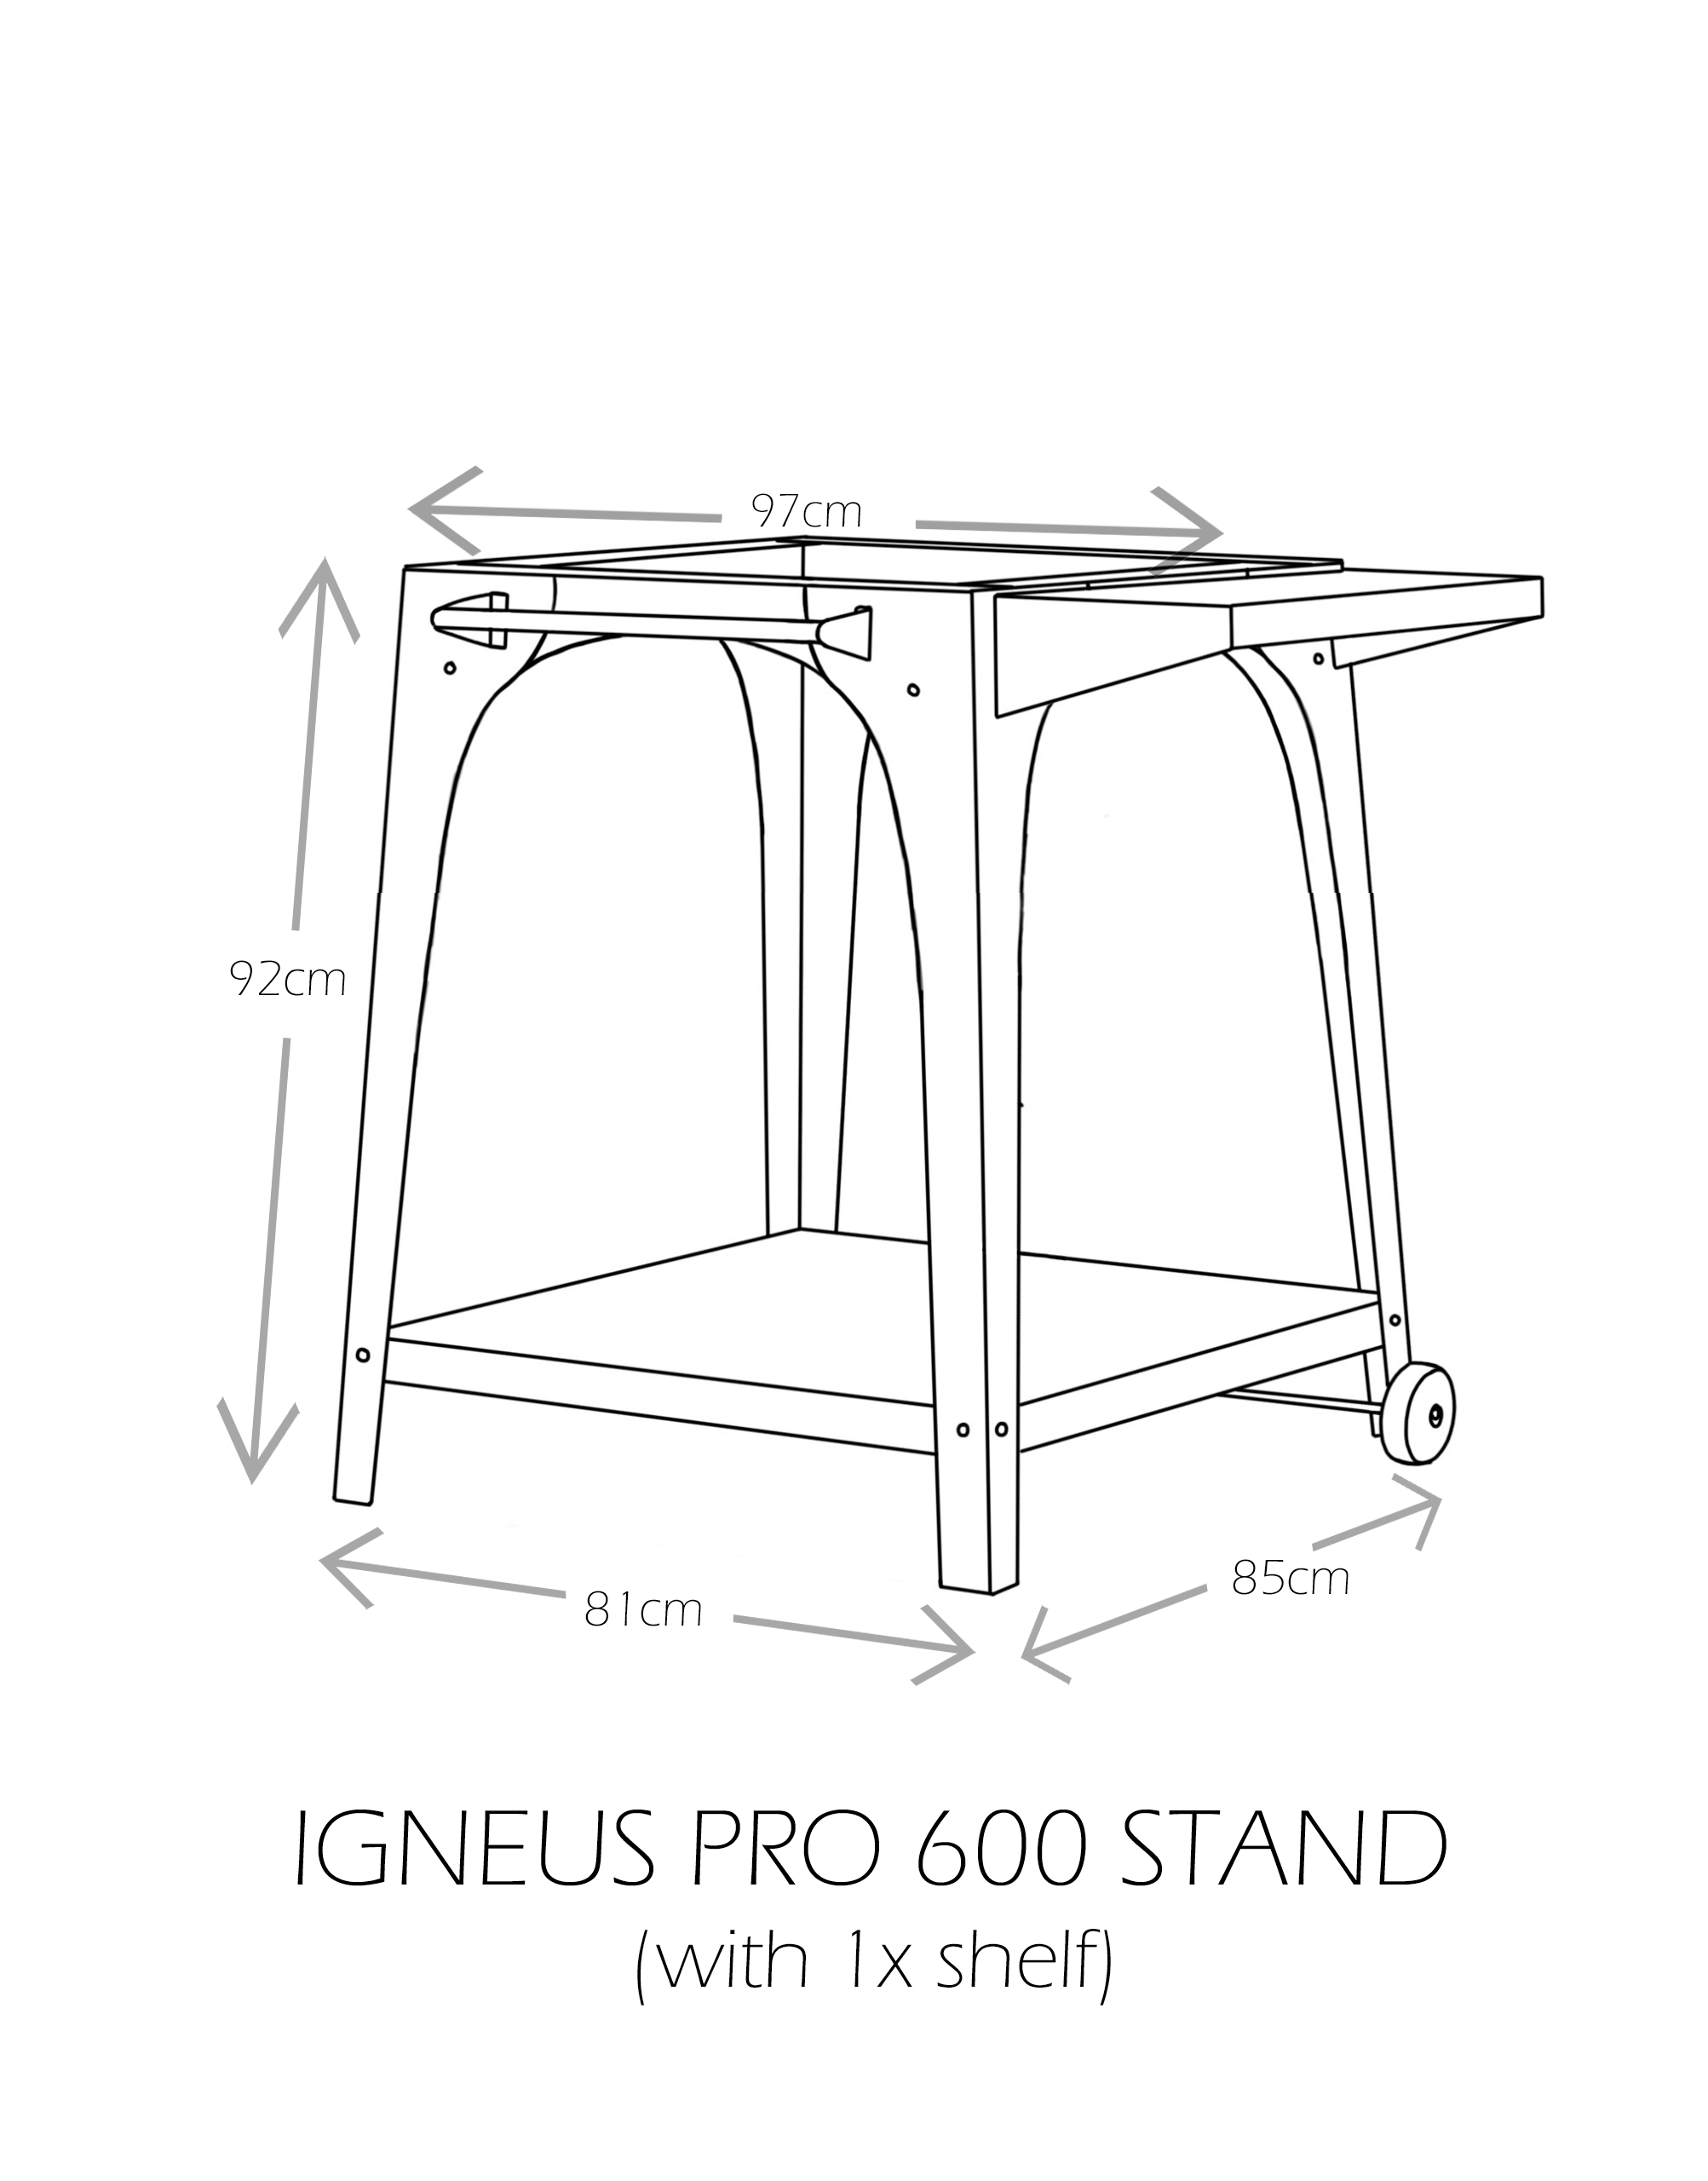 Igneus Pro 600 Stand with 1x shelf - Dimensions